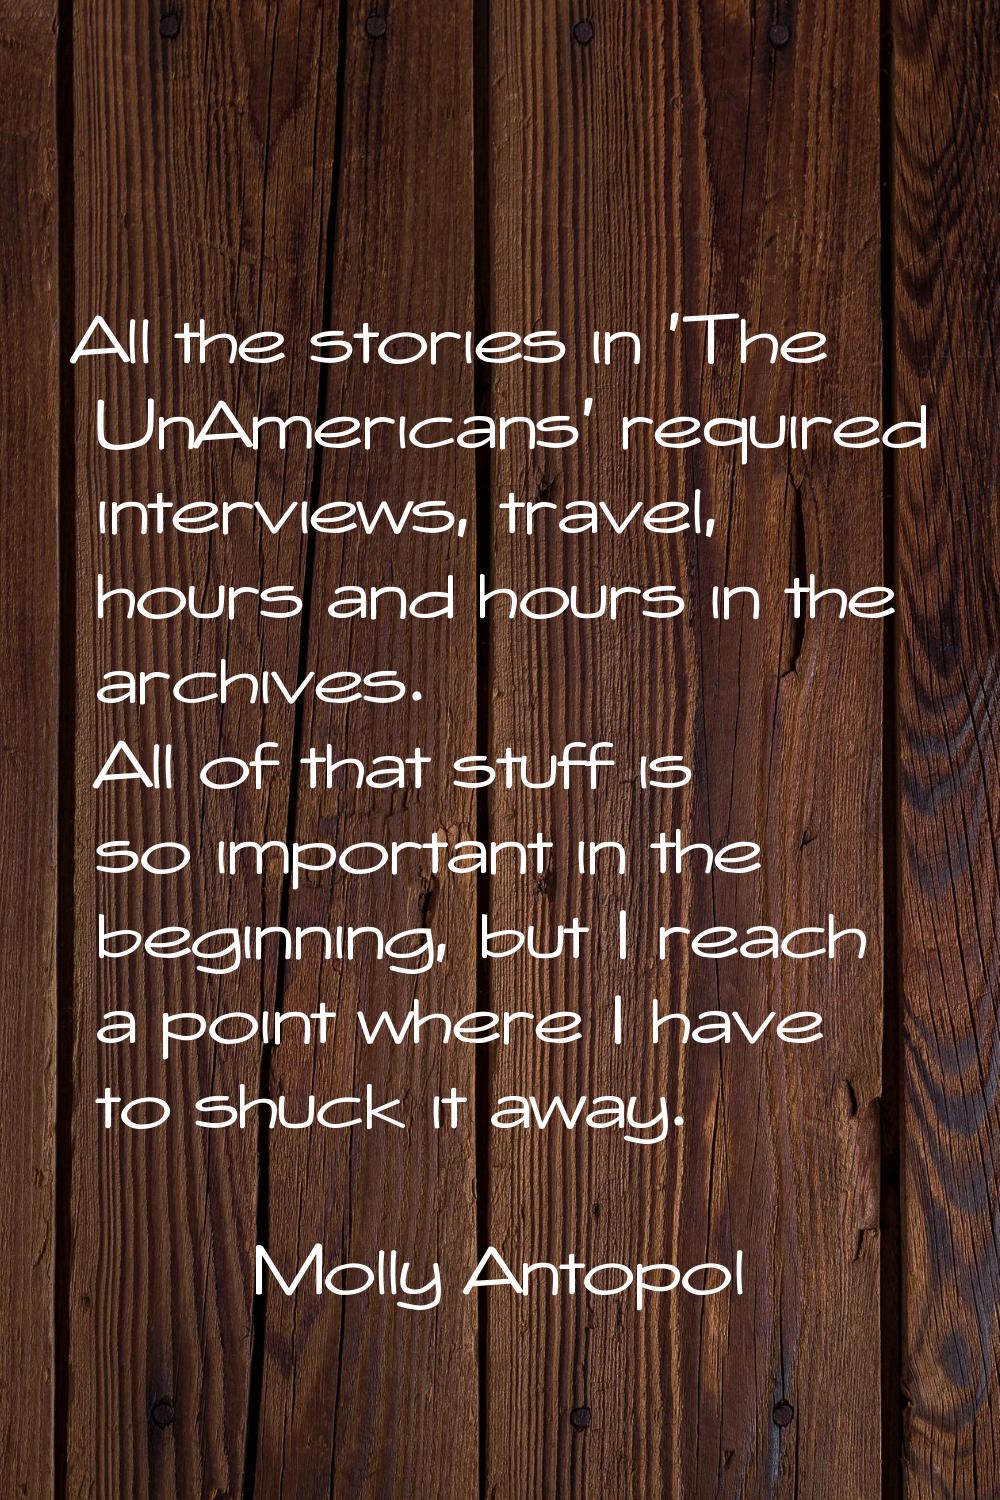 All the stories in 'The UnAmericans' required interviews, travel, hours and hours in the archives. 